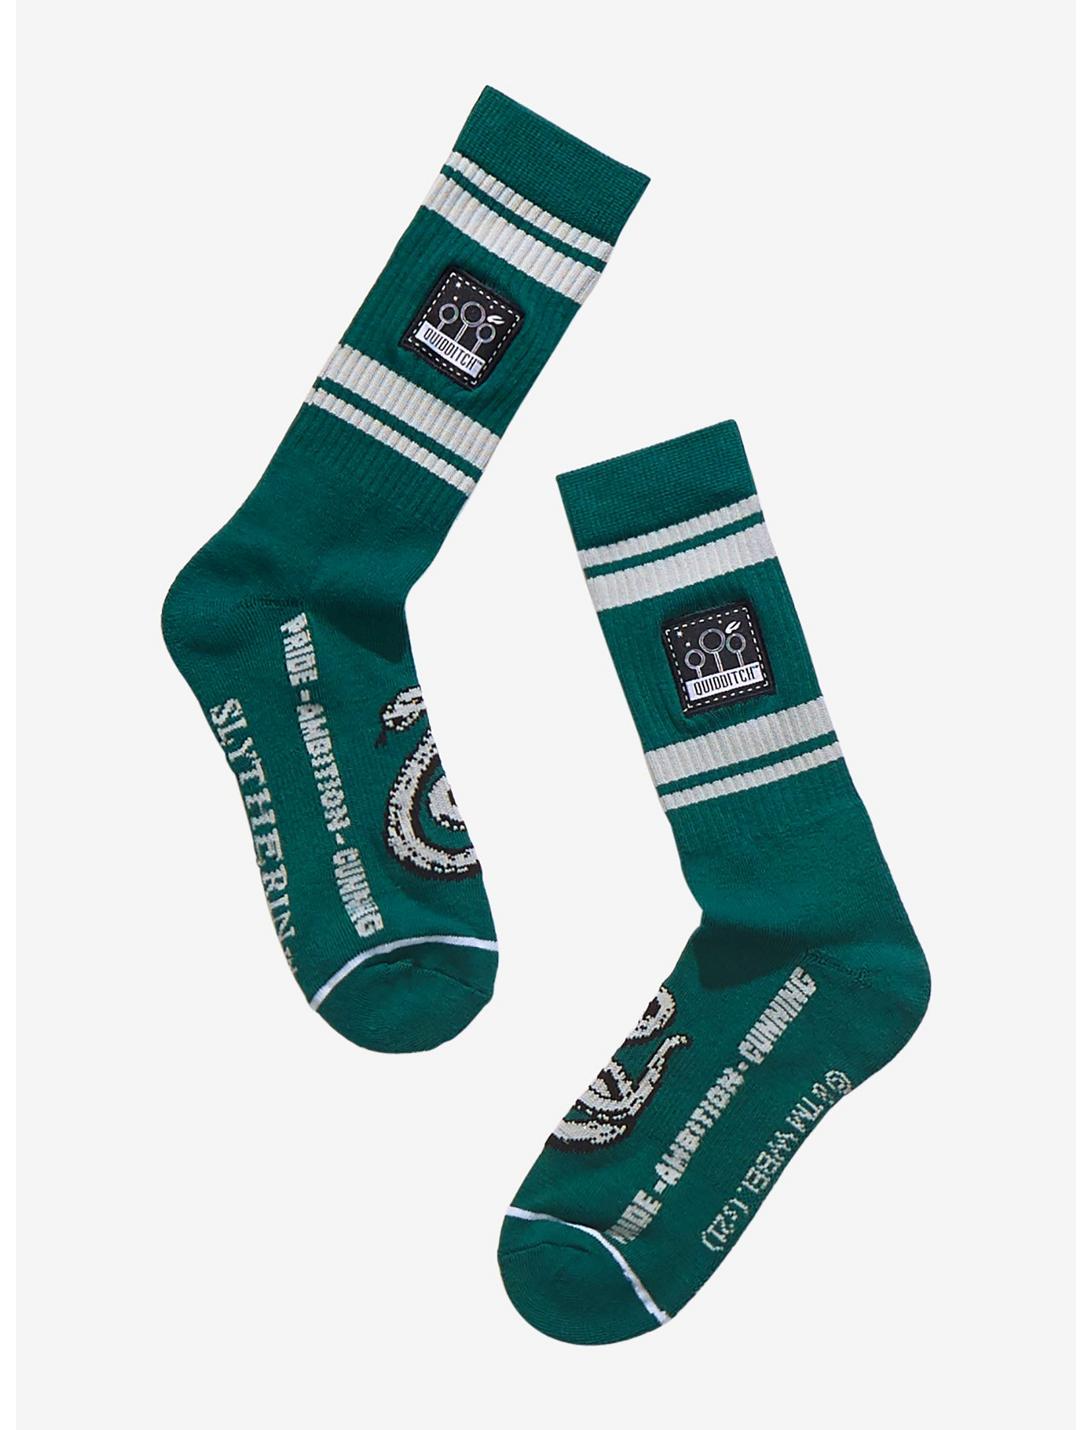 Harry Potter Slytherin Quidditch Crew Socks - BoxLunch Exclusive, , hi-res